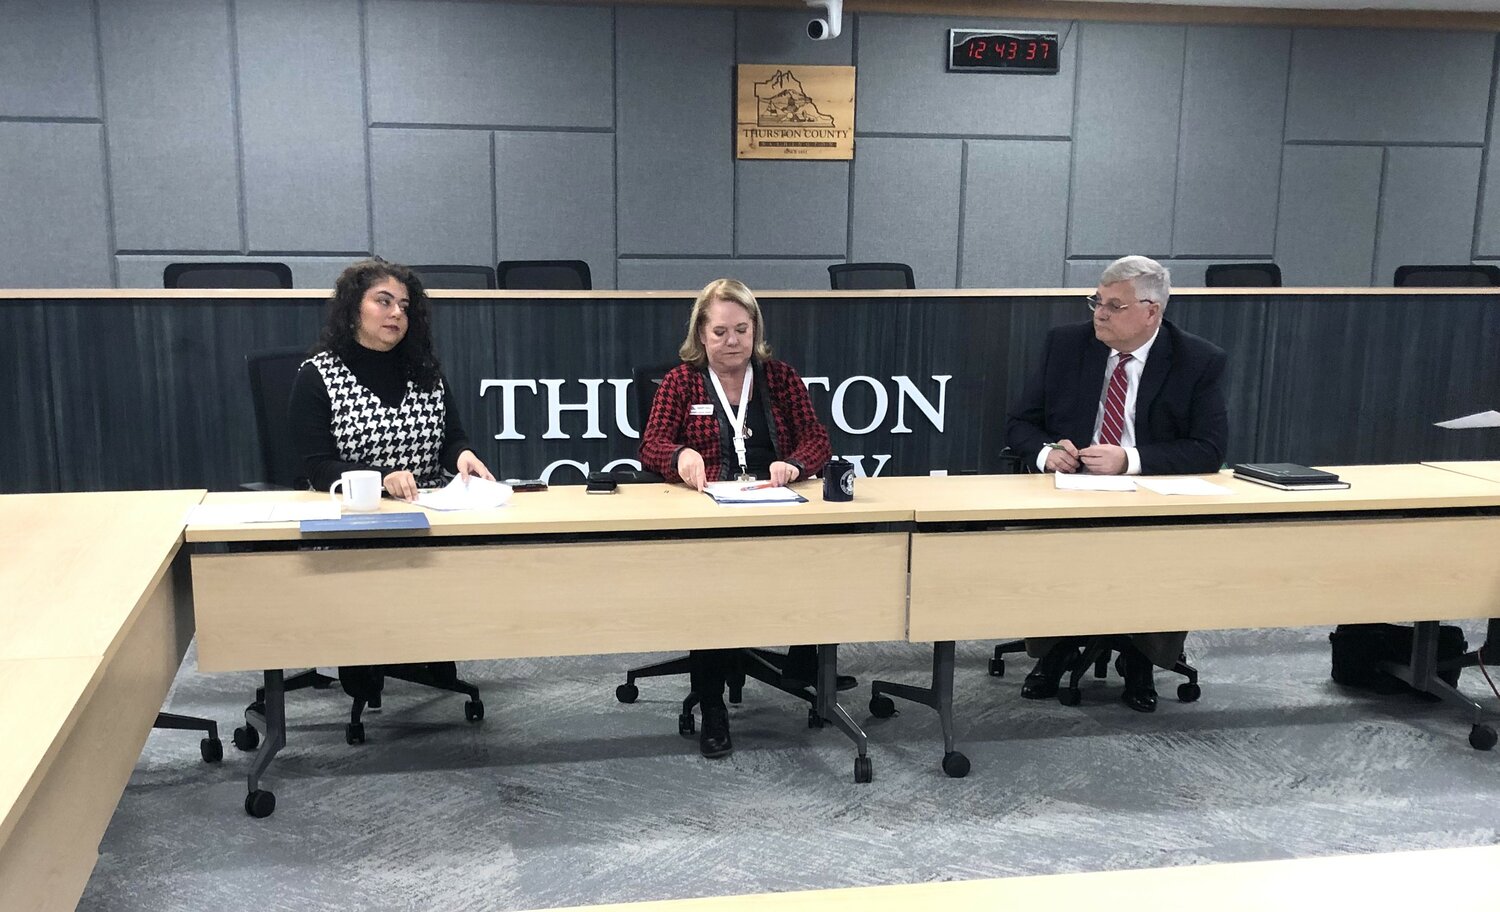 The certifying board before the swearing-in. From left to right councilmember Carolina Mejia, county auditor, Mary Hall, County prosecutor, John Tunheim.